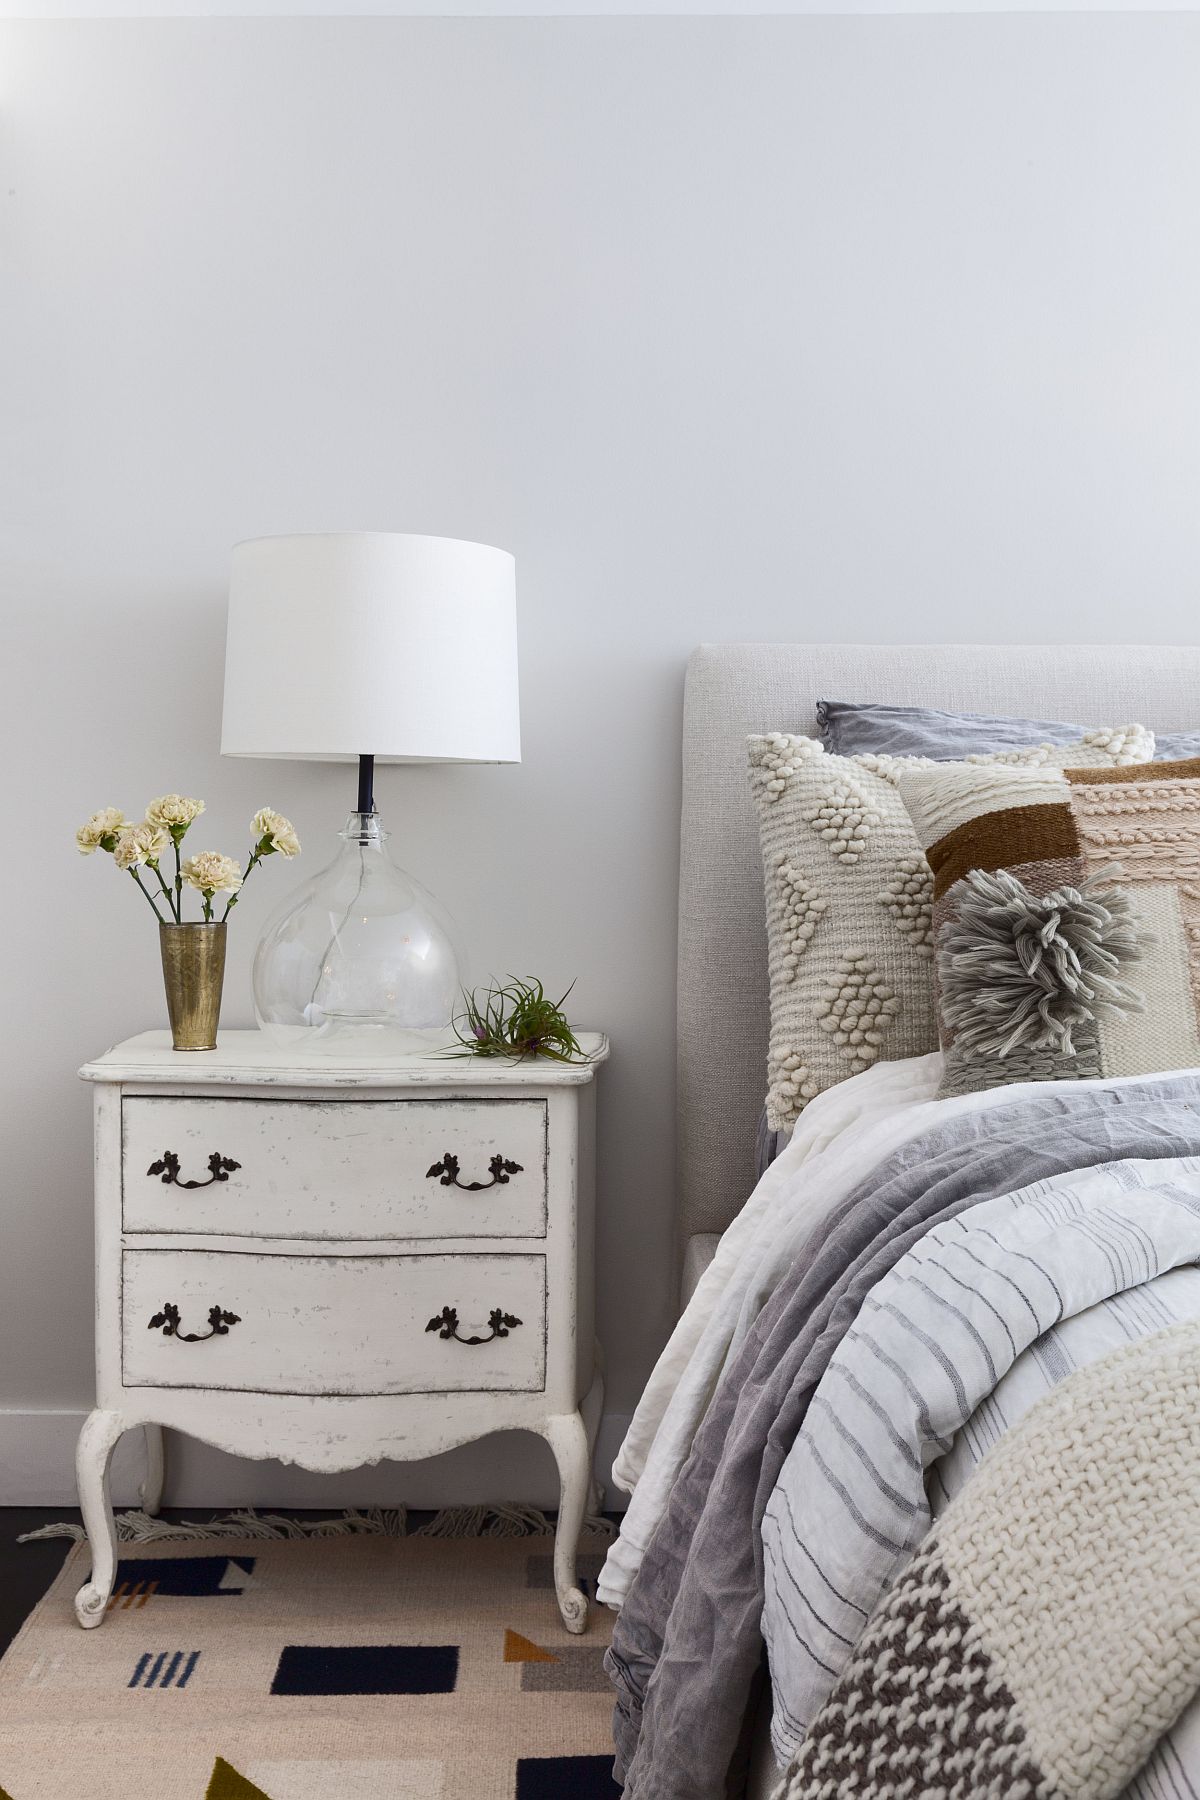 Nightstand-with-classy-bedside-lamp-saves-space-while-adding-functionality-78896